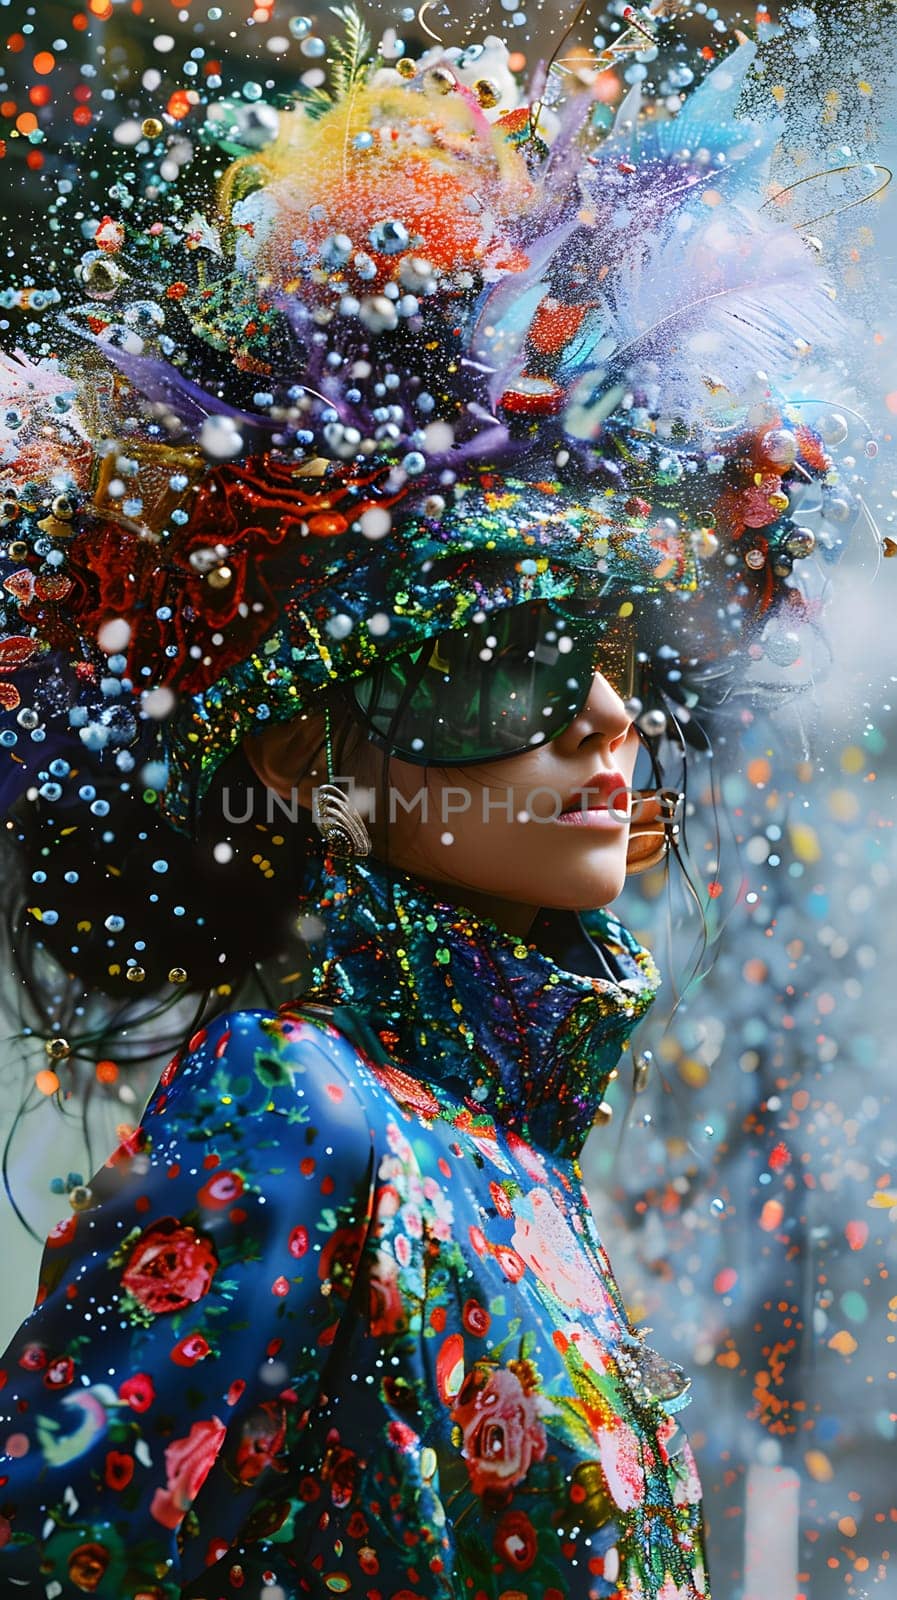 A woman adorned with a vibrant hat and sunglasses stands amidst falling confetti. She is surrounded by nature, art, and joyful people at a festive event